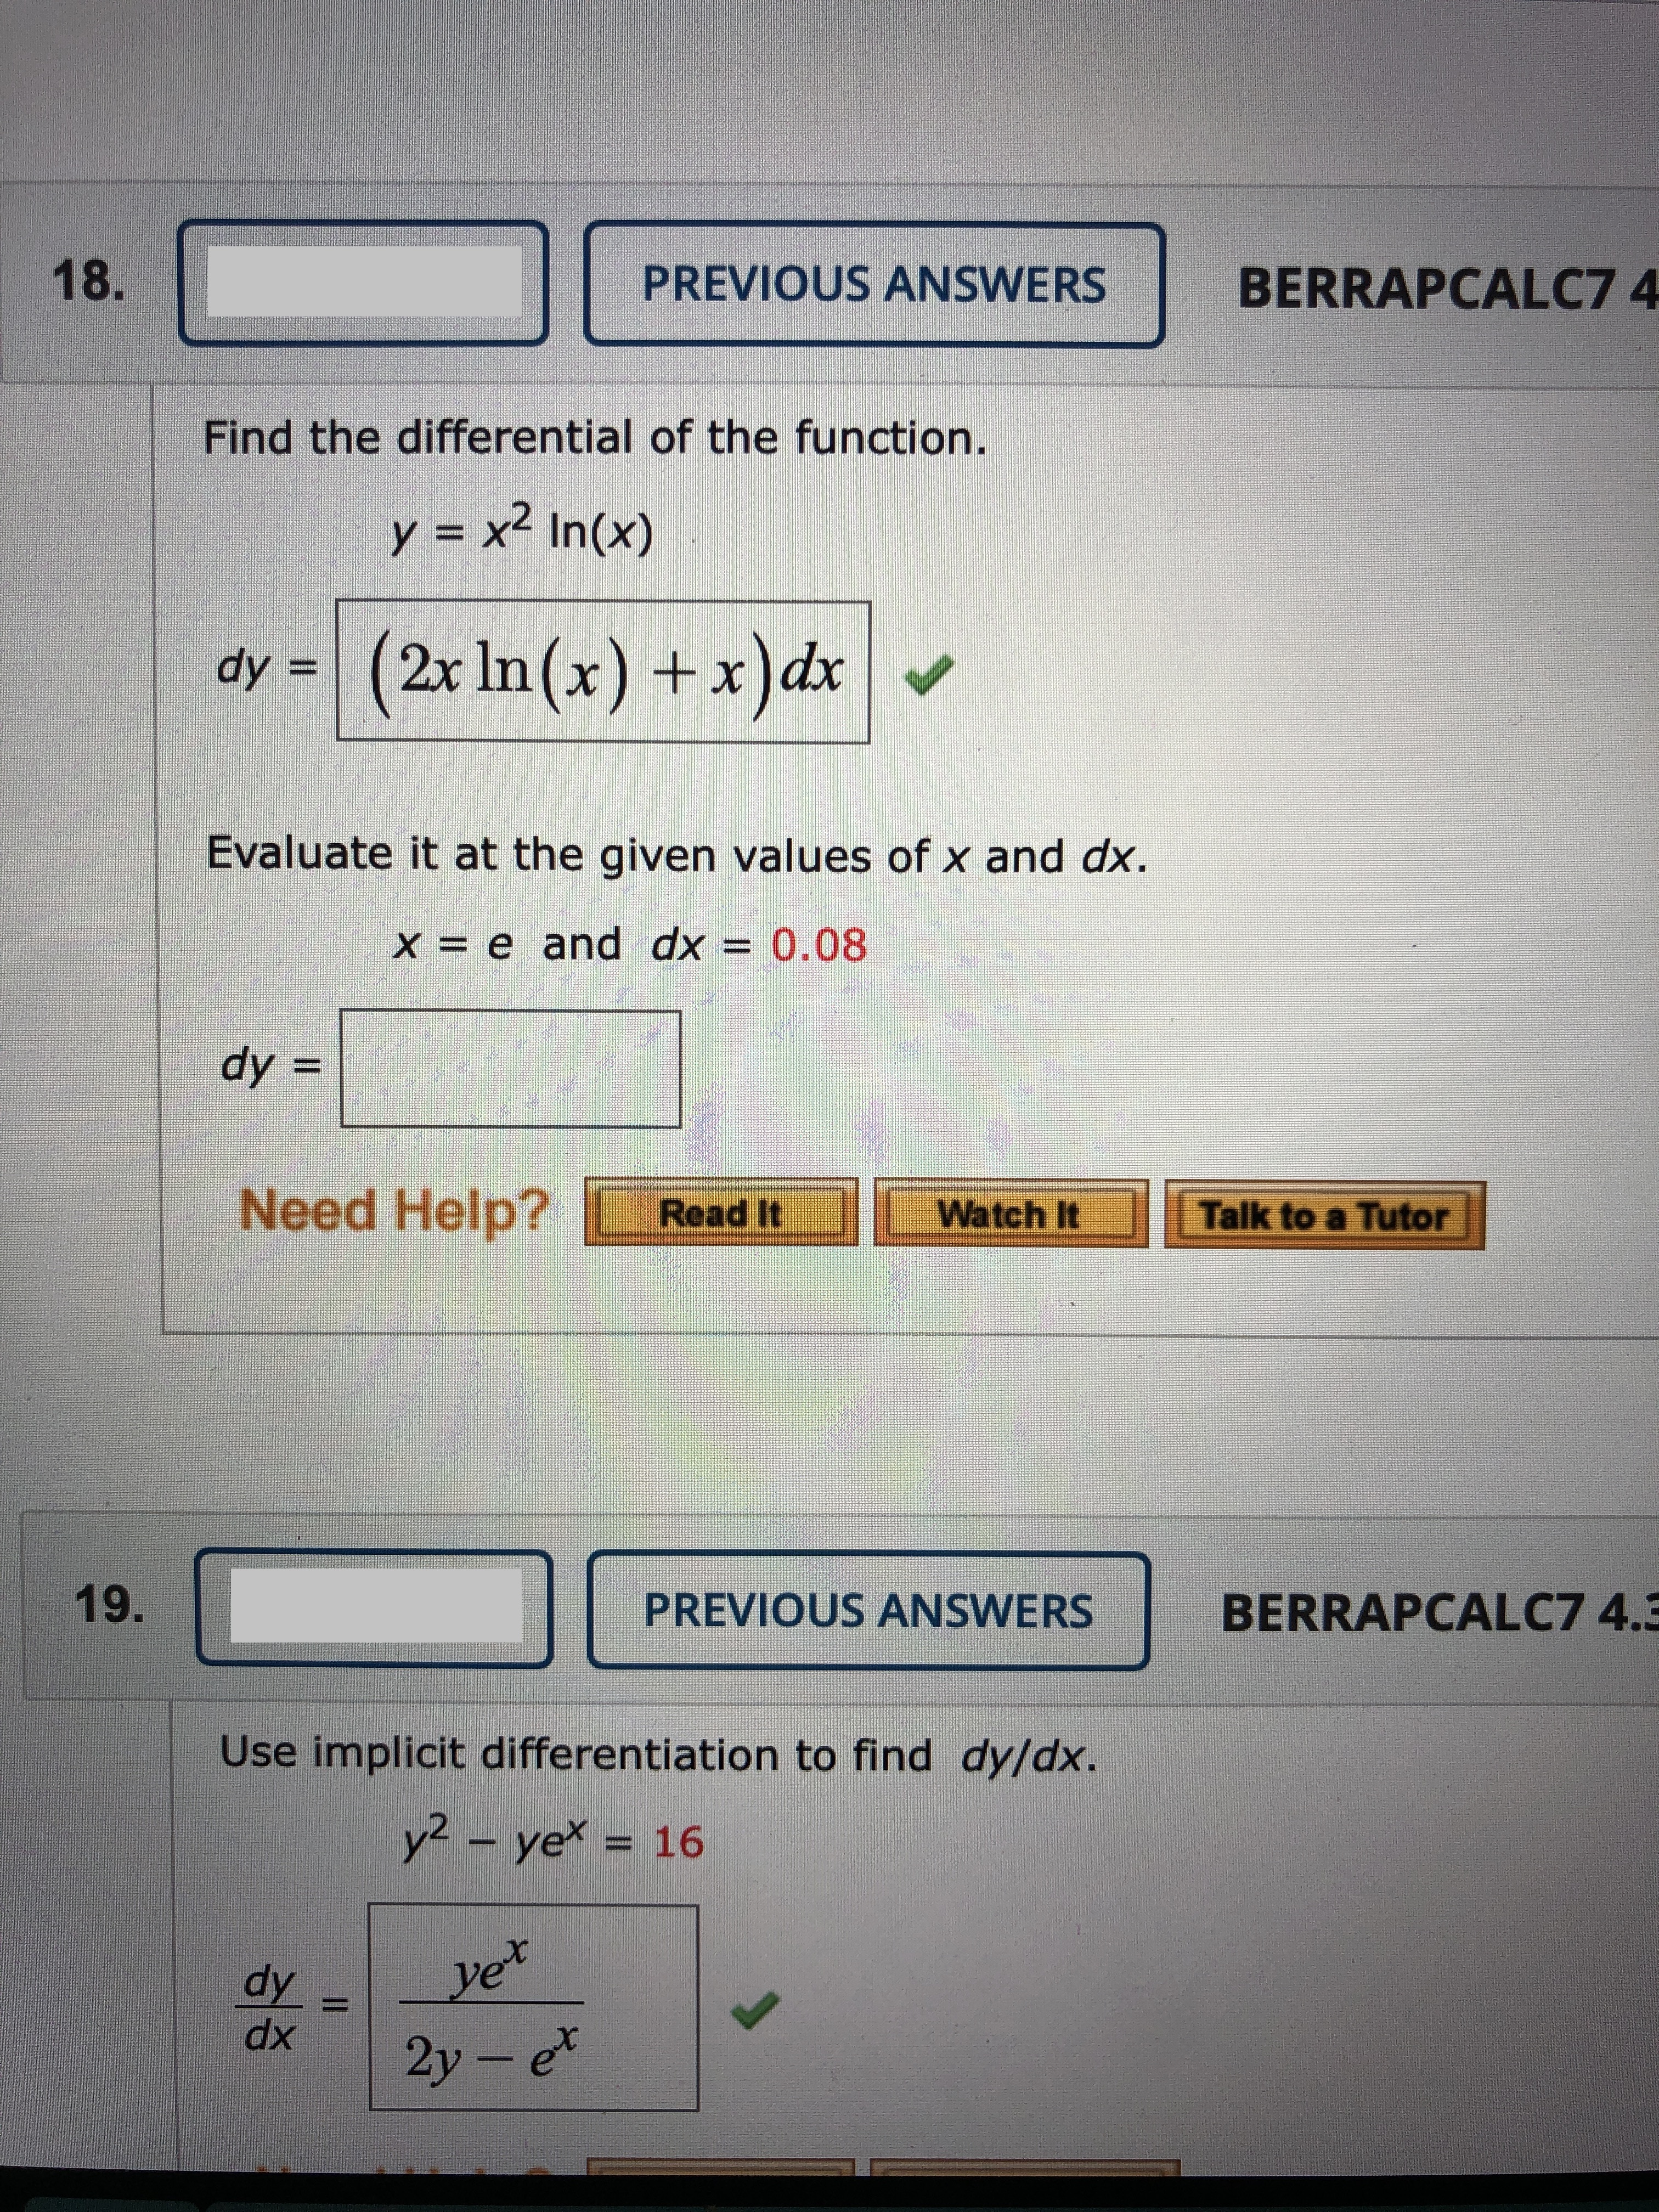 18.
PREVIOUS ANSWERS
BERRAPCALC7 4
Find the differential of the function.
y = x² In(x)
dy =
(2x In(x) +x)dx
ノ
Evaluate it at the given values of x and dx.
X = e and dx = 0.08
dy =
Need Help?
Read It
Watch It
Talk to a Tutor
19.
PREVIOUS ANSWERS
BERRAPCALC7 4.3
Use implicit differentiation to find dy/dx.
y2- ye = 16
dy
yet
xp
2y- et
II
